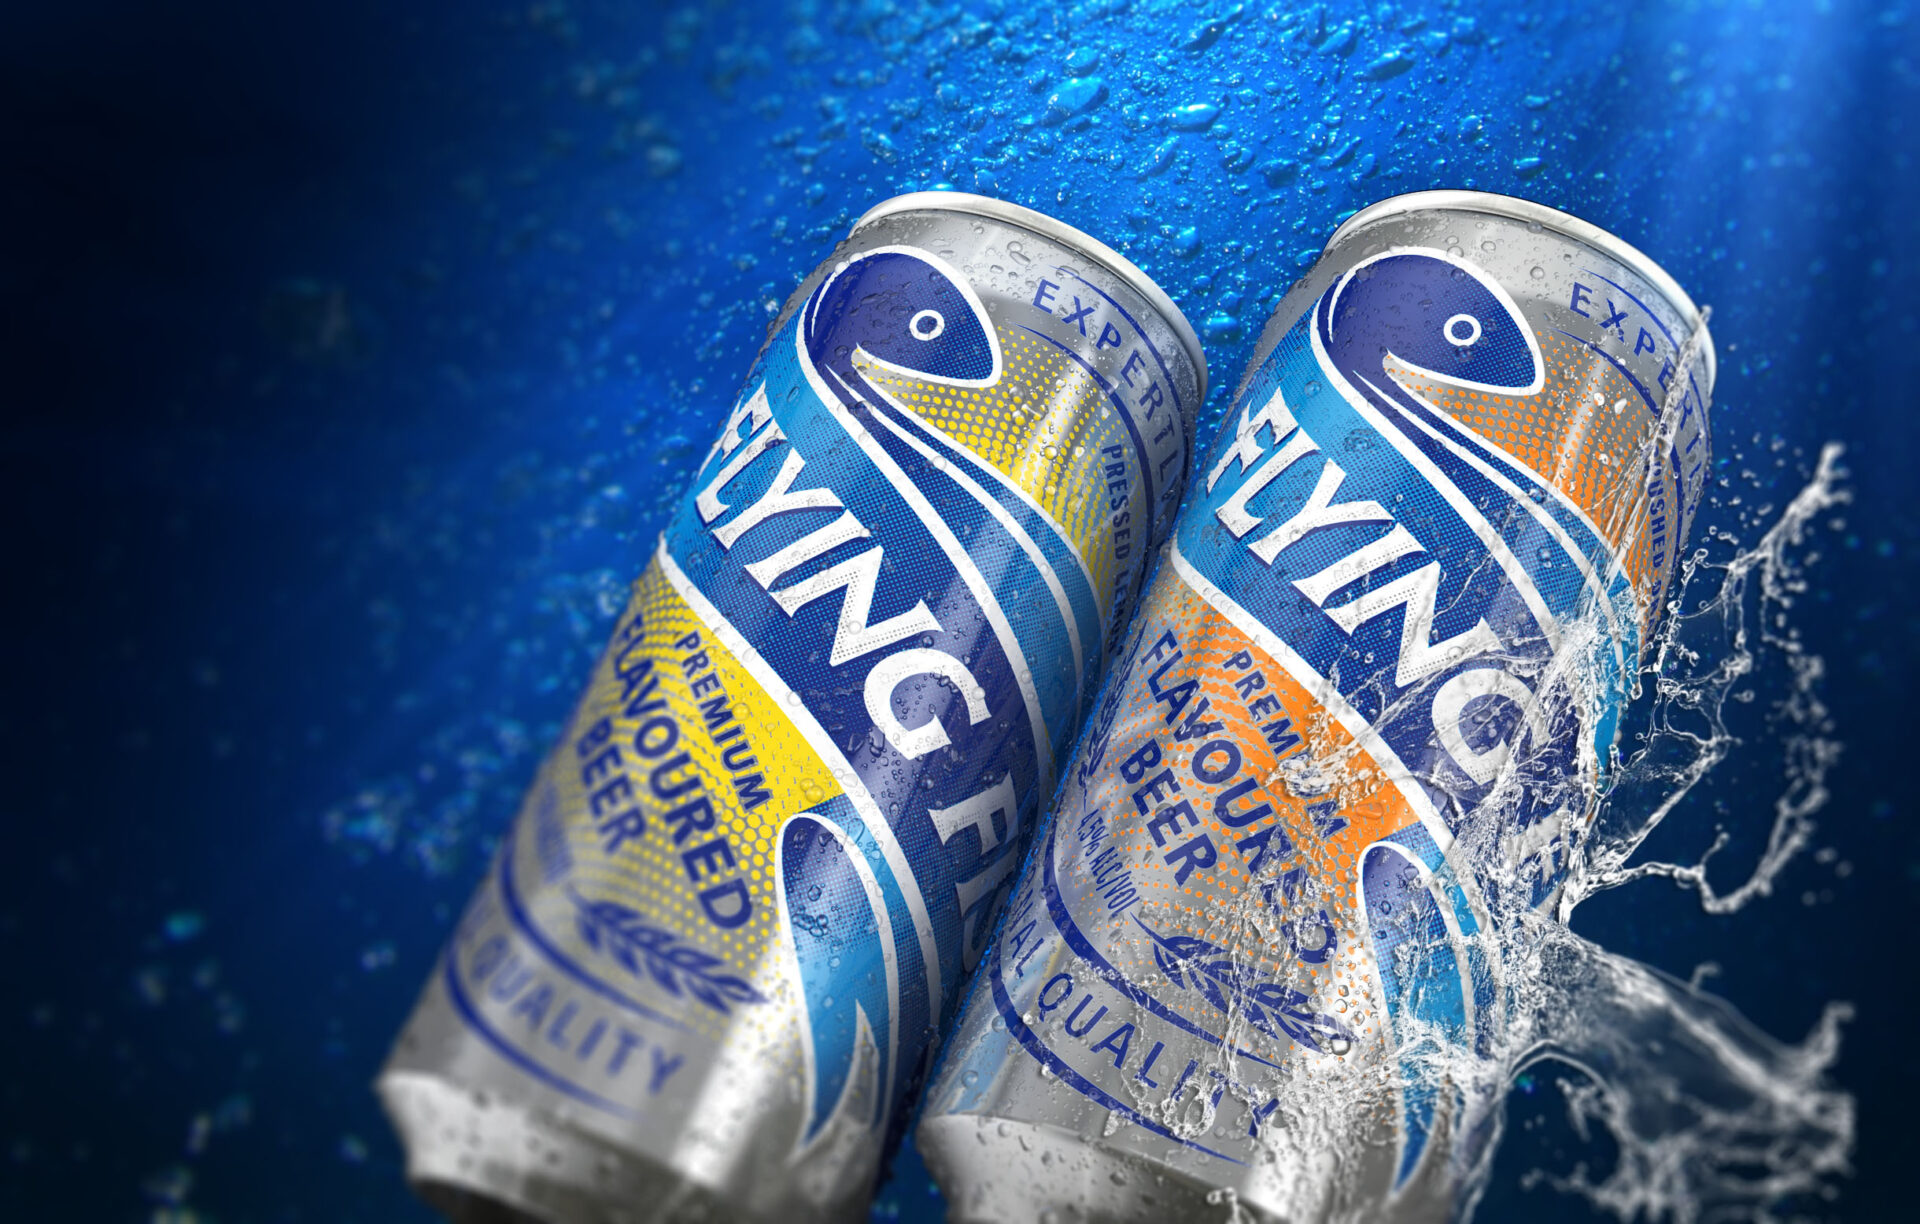 Flying Fish beer can alcohol packaging design south africa